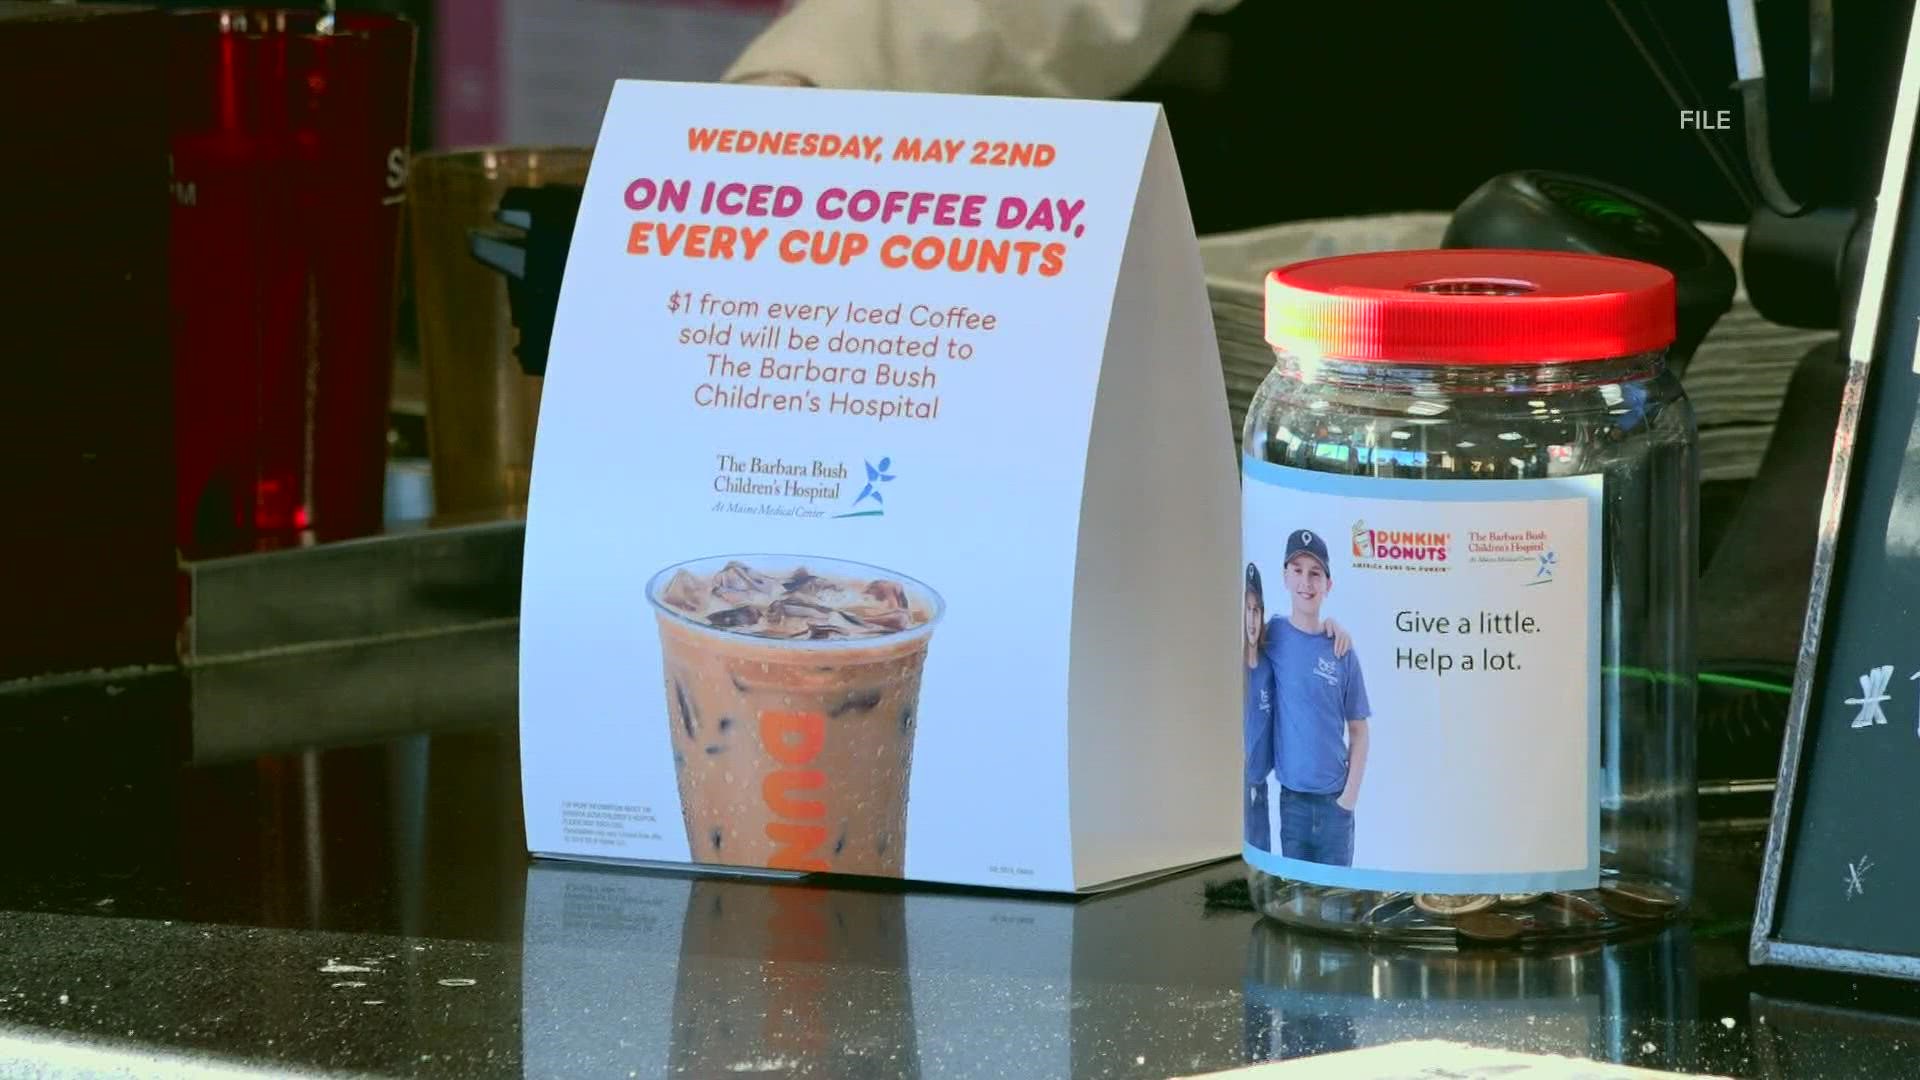 Wednesday, May 25th, is Dunkin' Iced Coffee Day. $1 from every iced coffee purchased in Maine, eastern NH, will be donated to the Barbara Bush Children's Hospital.